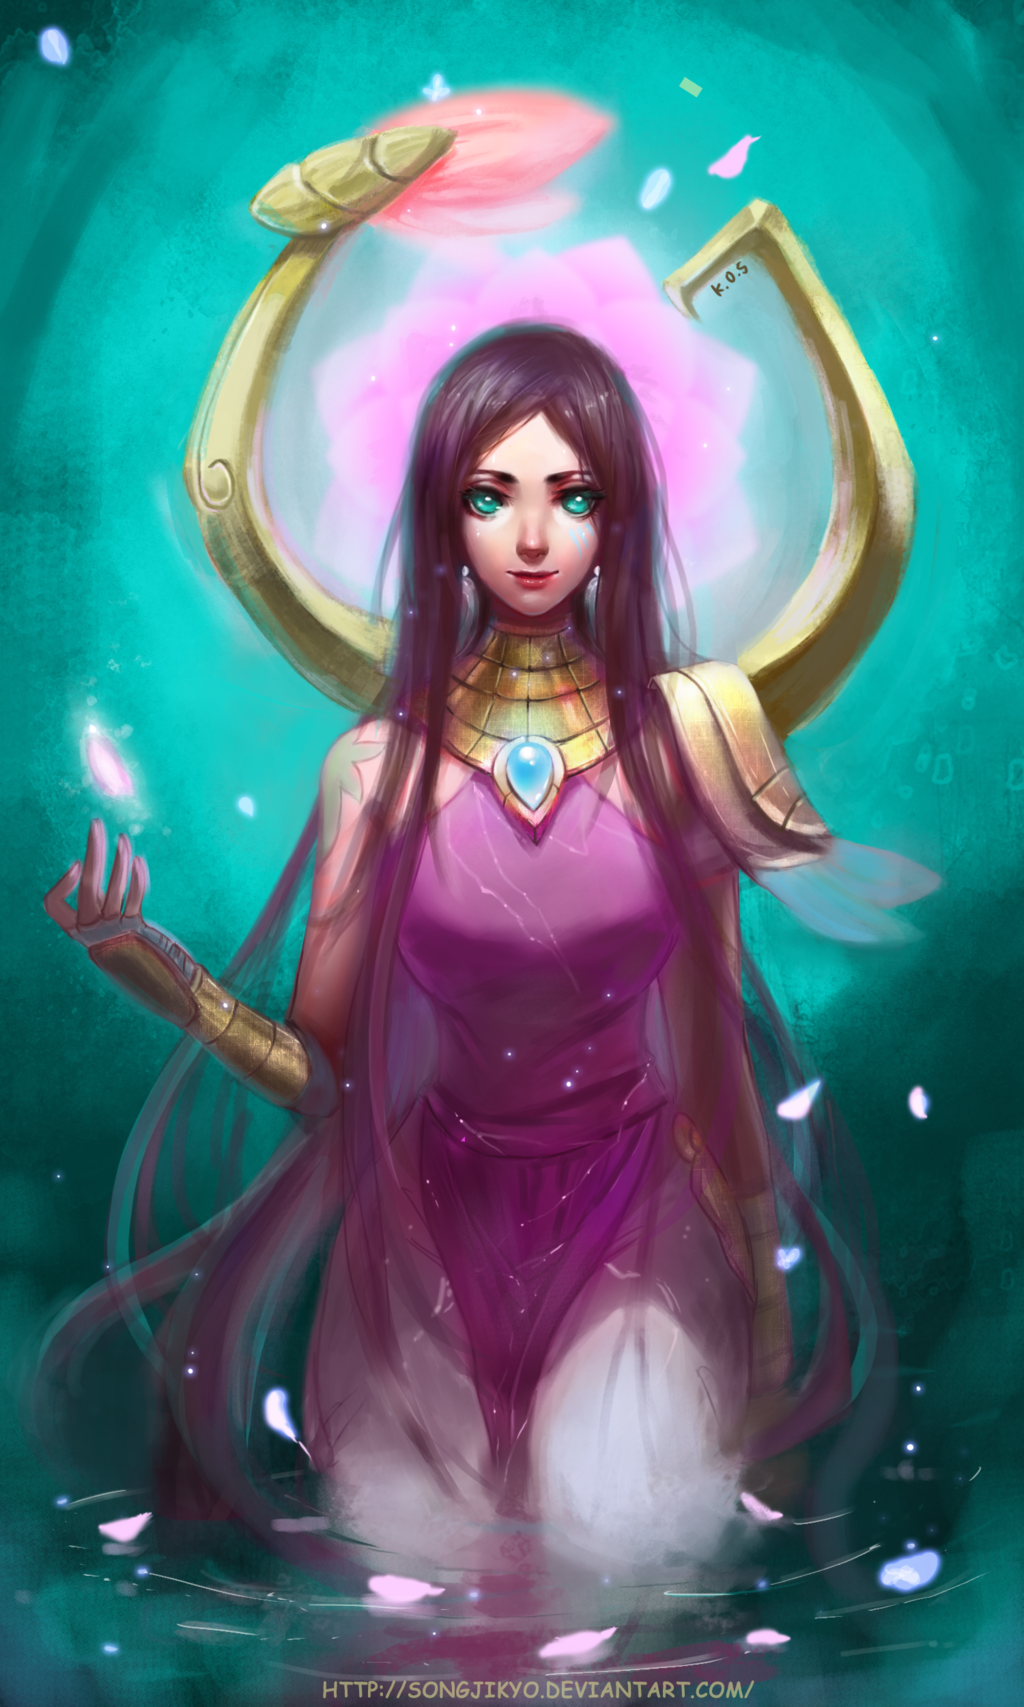 medius-the-fallen:  givs-san:  Order Of The Lotus Karma by SongJiKyo  Oh my goodness